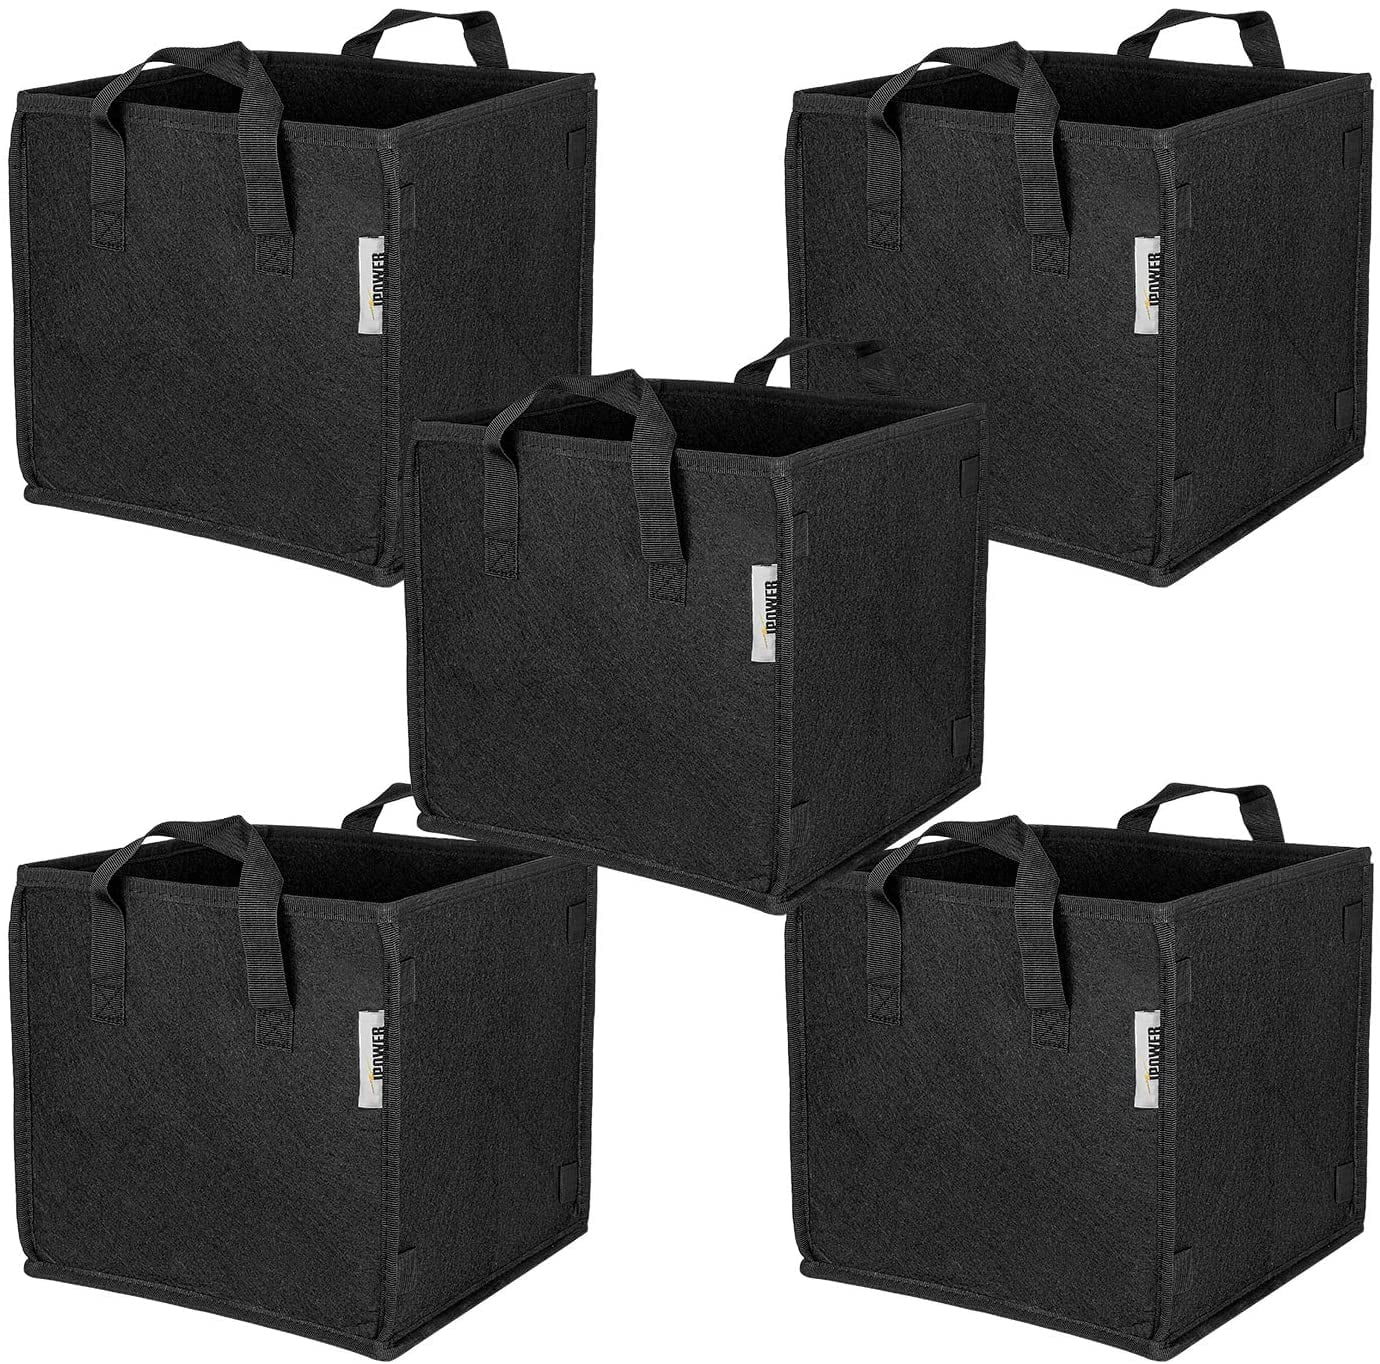 3 5 7 10 15 20 Gallon iPower 5-PACK Plant Grow Bags Fabric Pots with Handles 